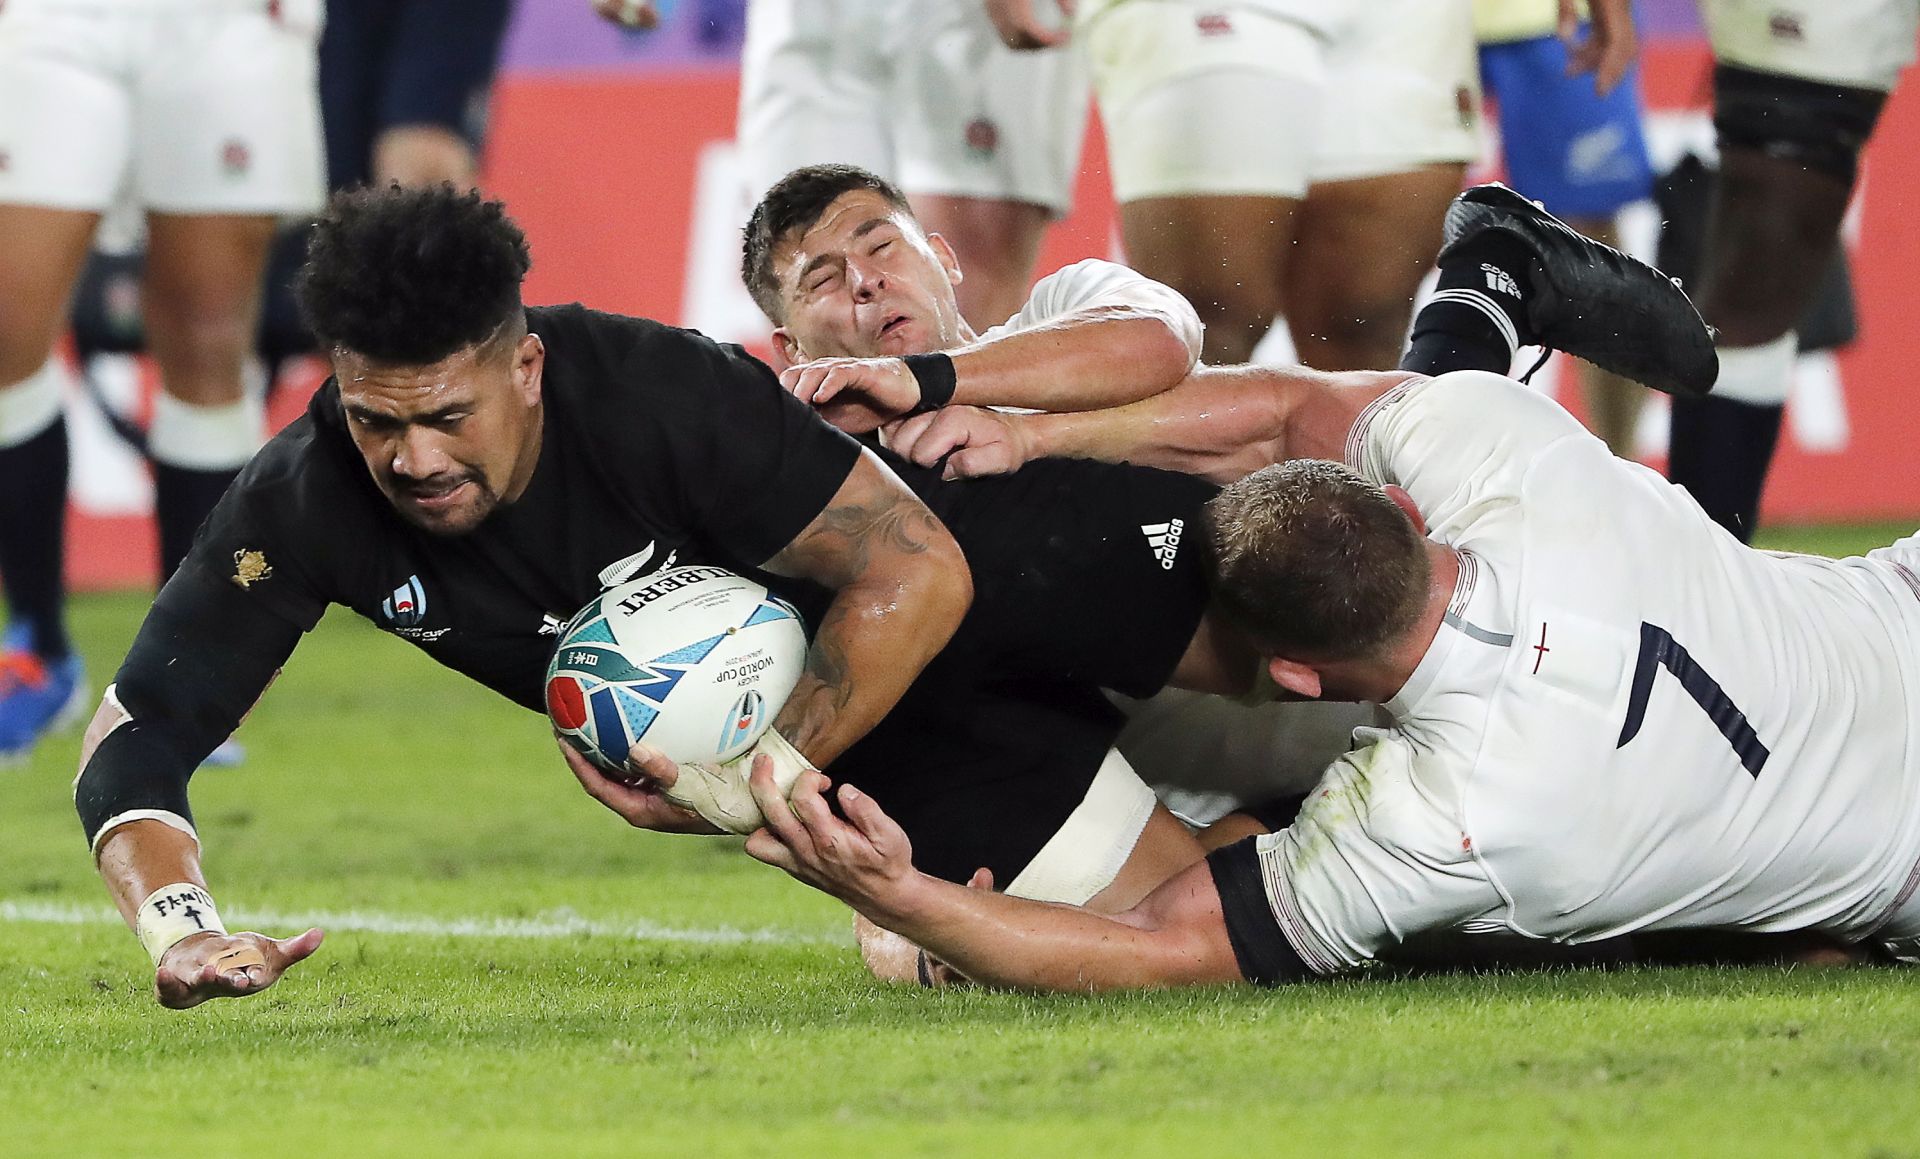 epa07950450 New Zealand's Ardie Savea (L) scores a try during the Rugby World Cup 2019 semi final match between New Zealand and England at the International Stadium Yokohama in Yokohama City, Japan, 26 October 2019.  EPA/MARK R. CRISTINO EDITORIAL USE ONLY/ NO COMMERCIAL SALES / NOT USED IN ASSOCATION WITH ANY COMMERCIAL ENTITY